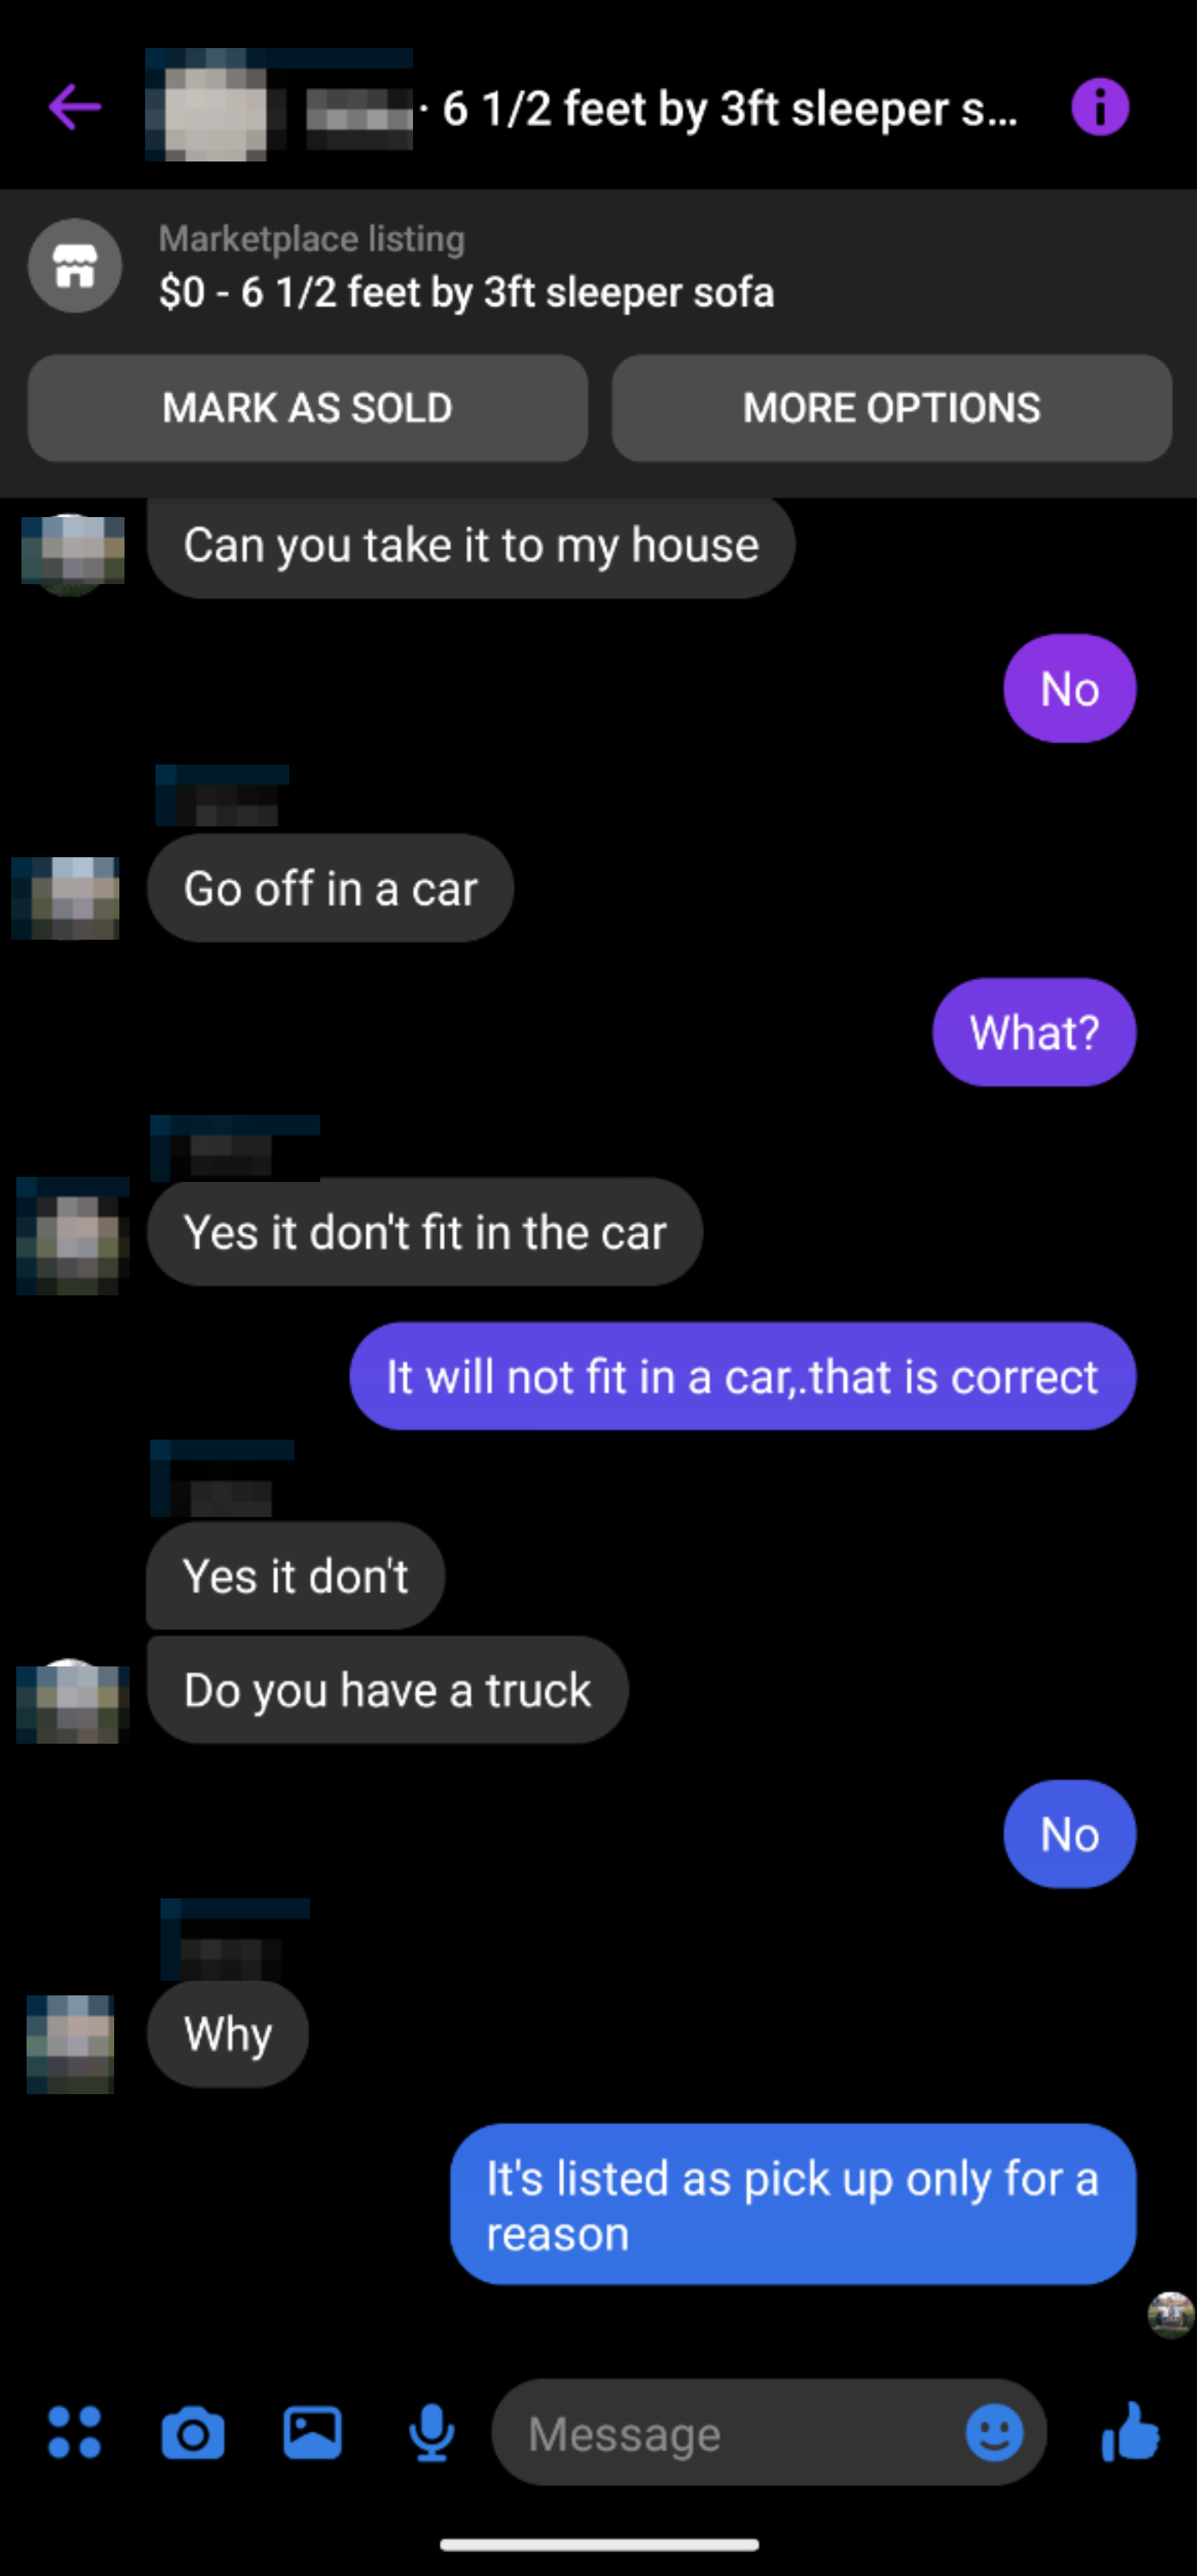 &quot;It&#x27;s listed as pick up only for a reason&quot;